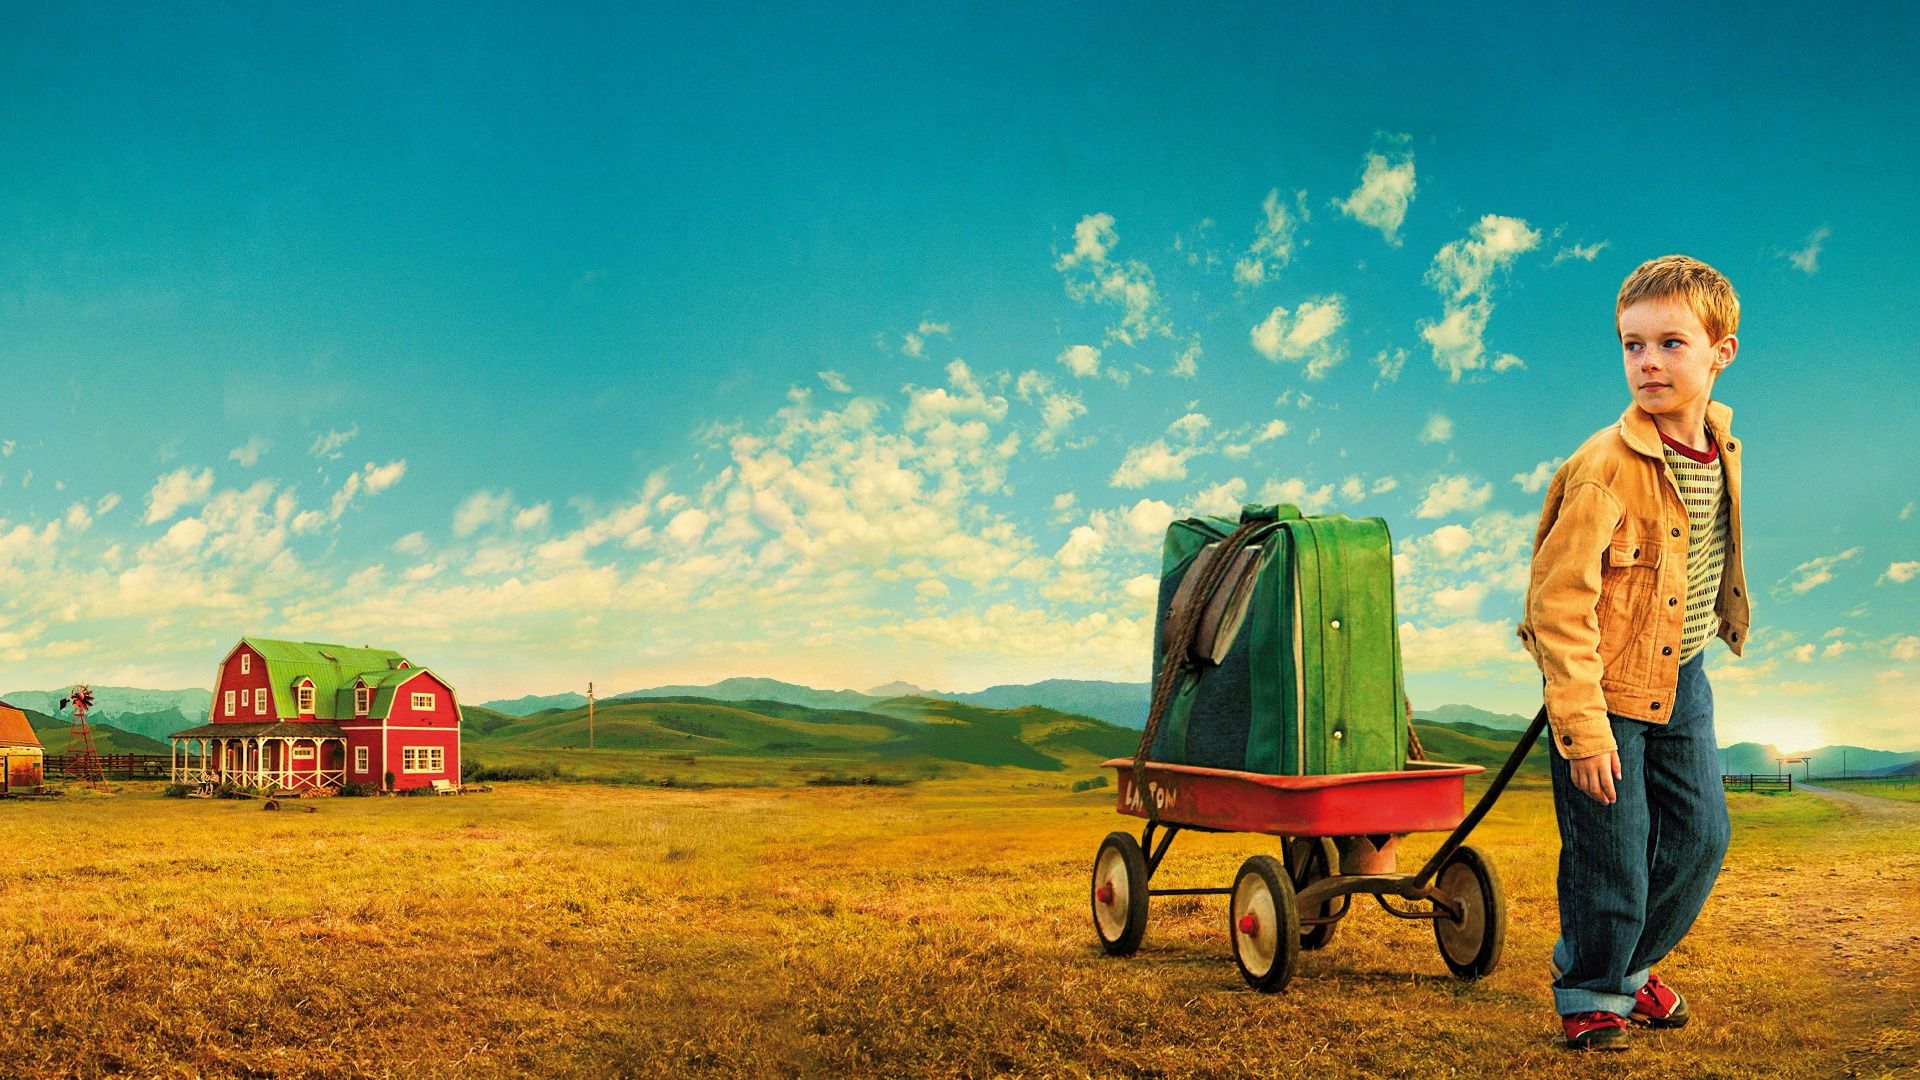 The Young and Prodigious T.S. Spivet background